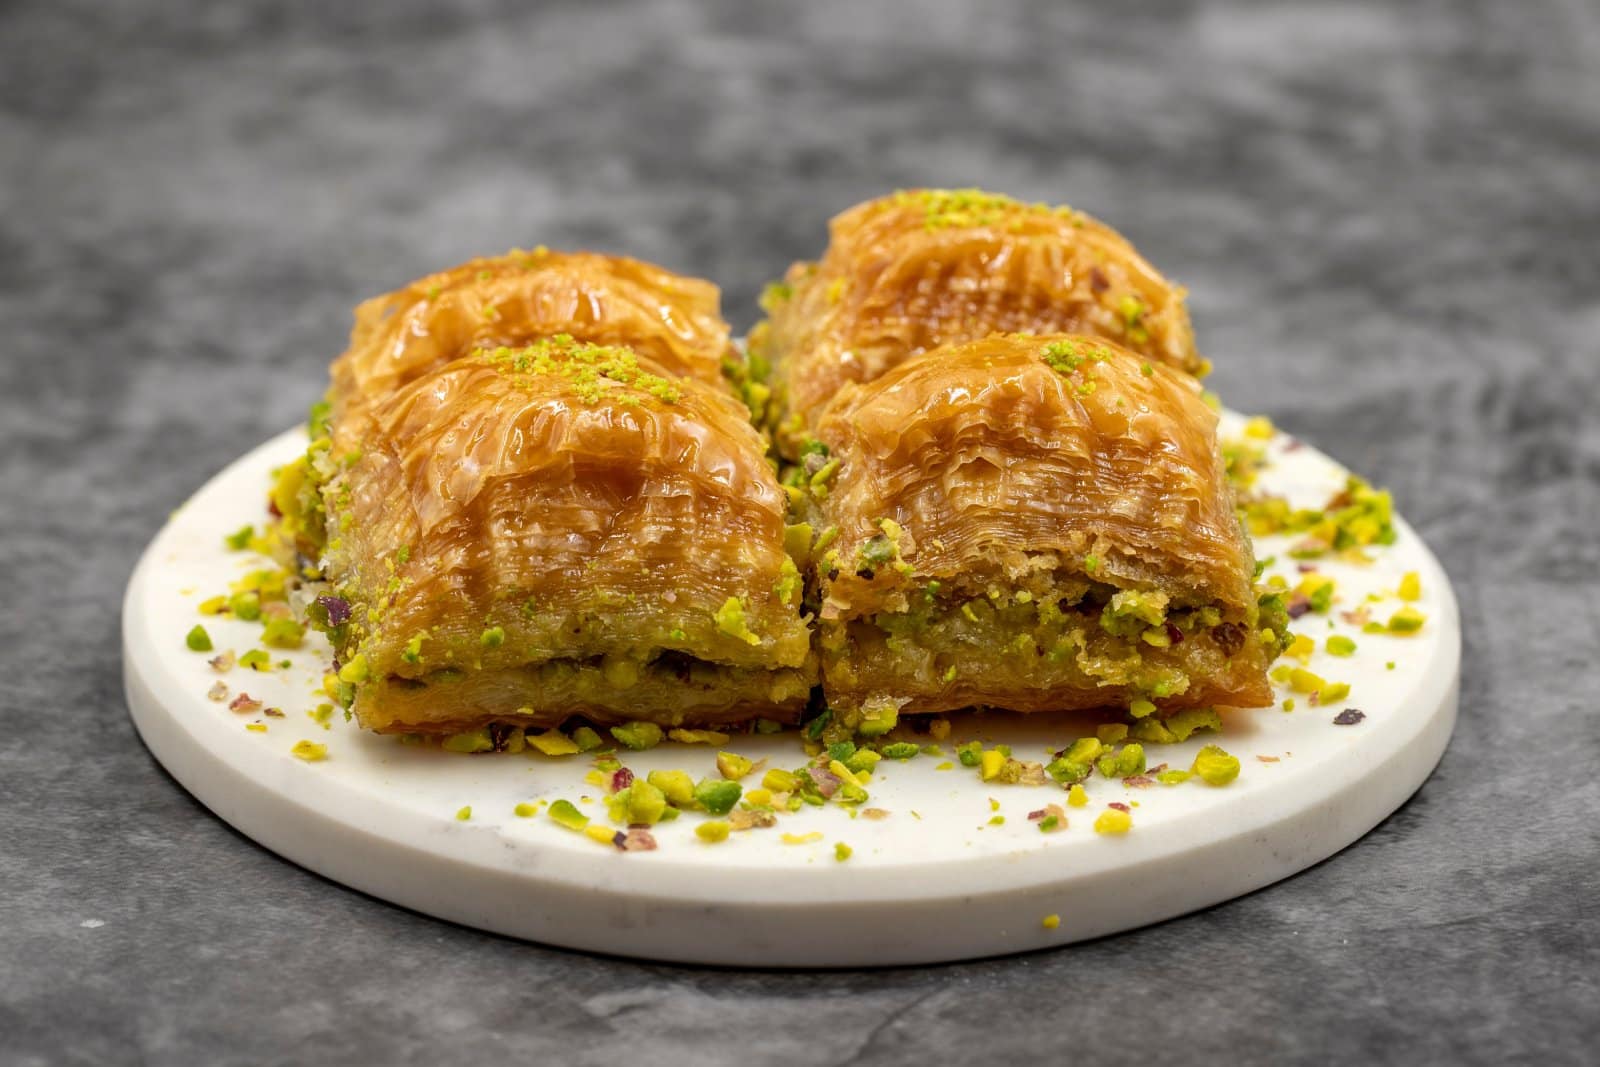 Image Credit: Shutterstock / Enez Selvi <p>A sweet dessert made of layers of filo pastry filled with chopped nuts and sweetened with syrup or honey.</p>